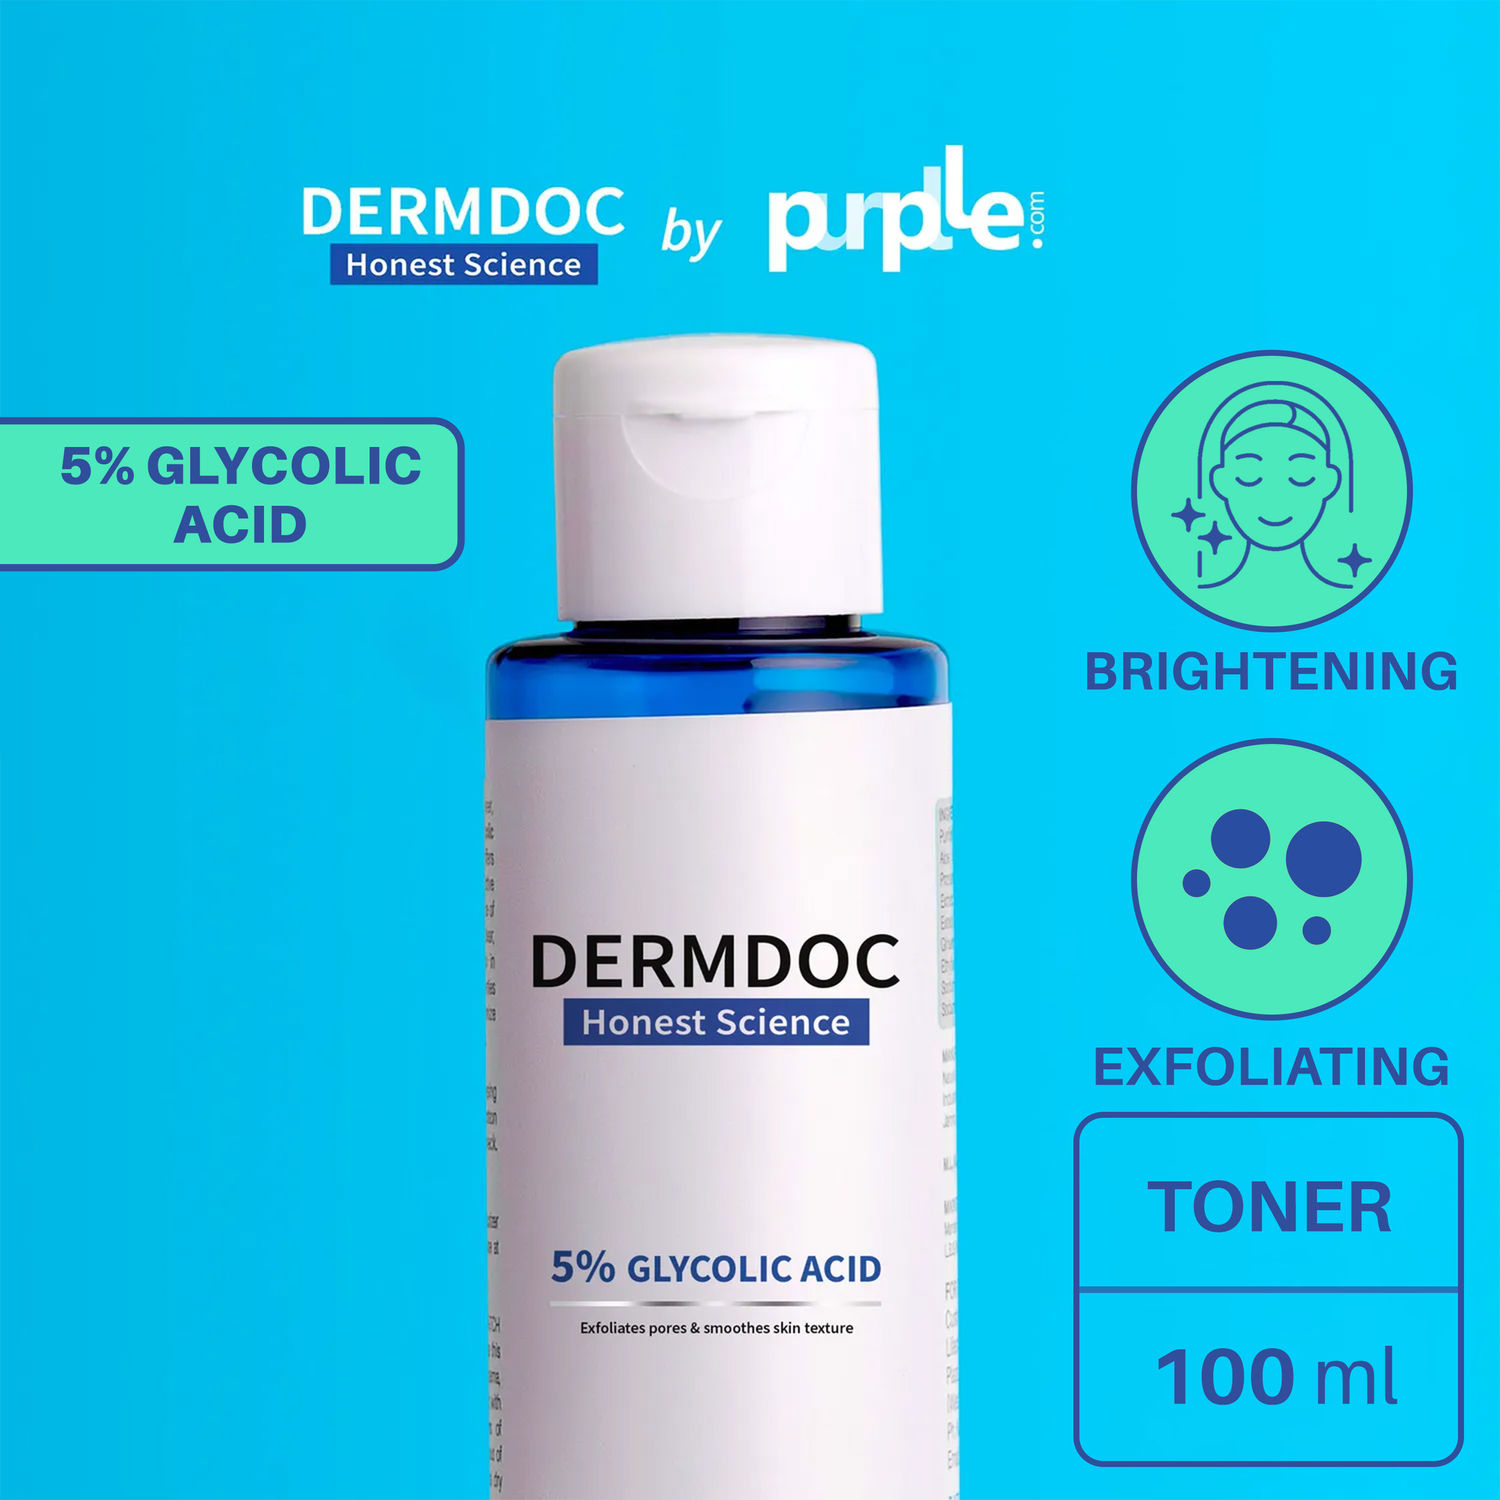 Buy DERMDOC by Purplle 5% Glycolic Acid Face Toner (100ml) | toner for oily skin, combination skin | skin brightening | glycolic acid exfoliator, glycolic acid for acne, acne scars - Purplle